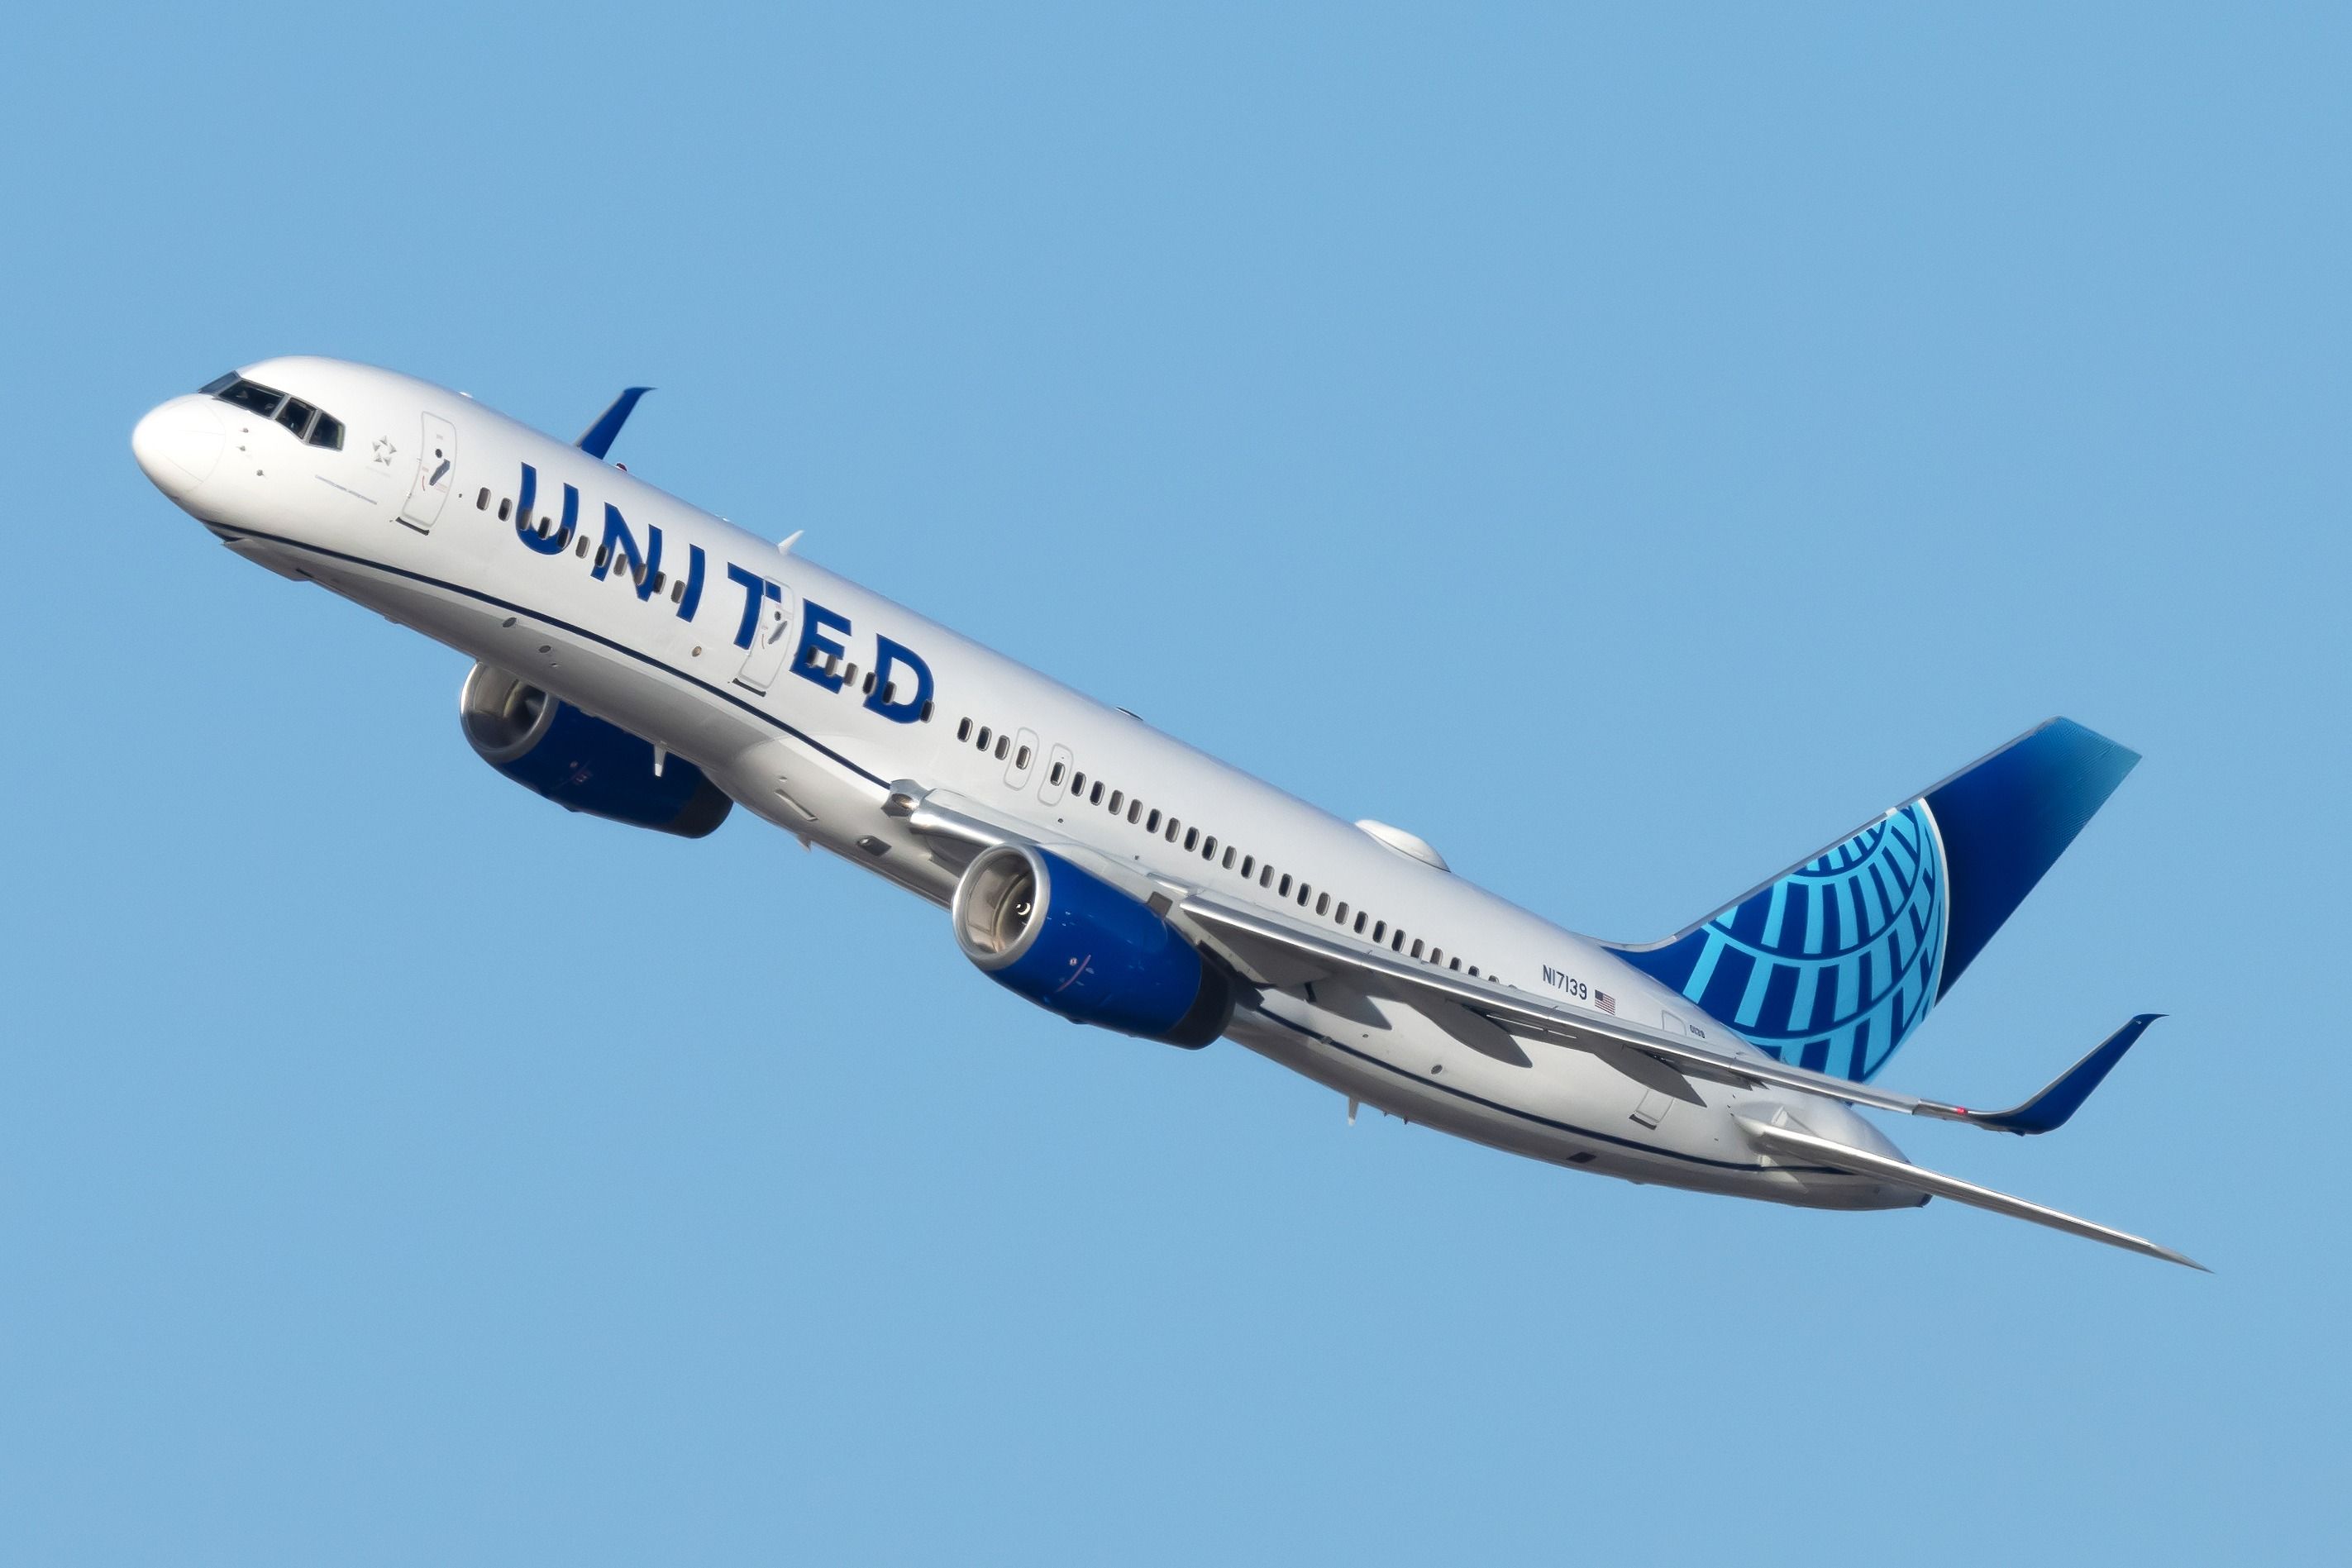  A United Airlines Boeing 757-200 Flying in The Sky.